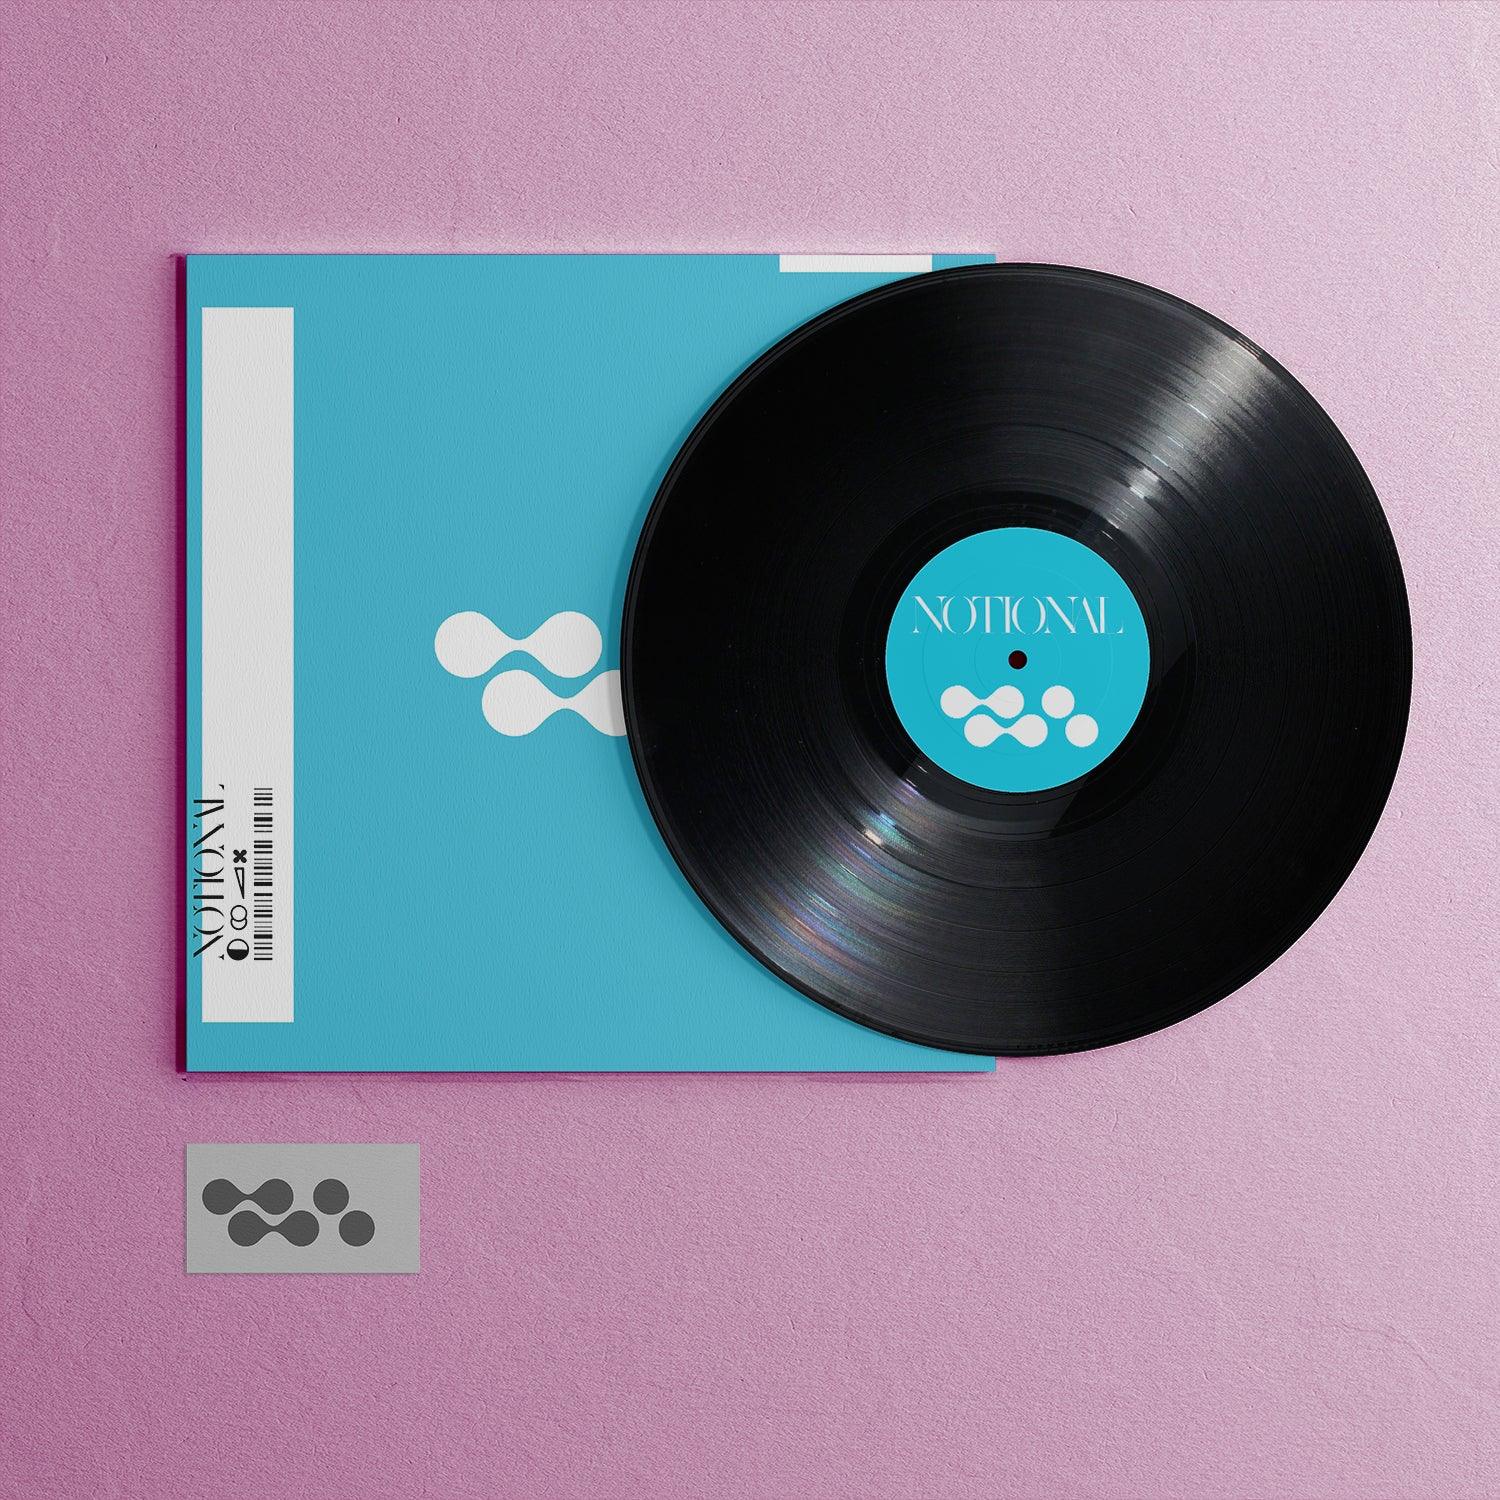 Editable Black 12" Vinyl Mockup. Disc on top of Sleeve with Download Card below. Showcase Your Music with Impact.